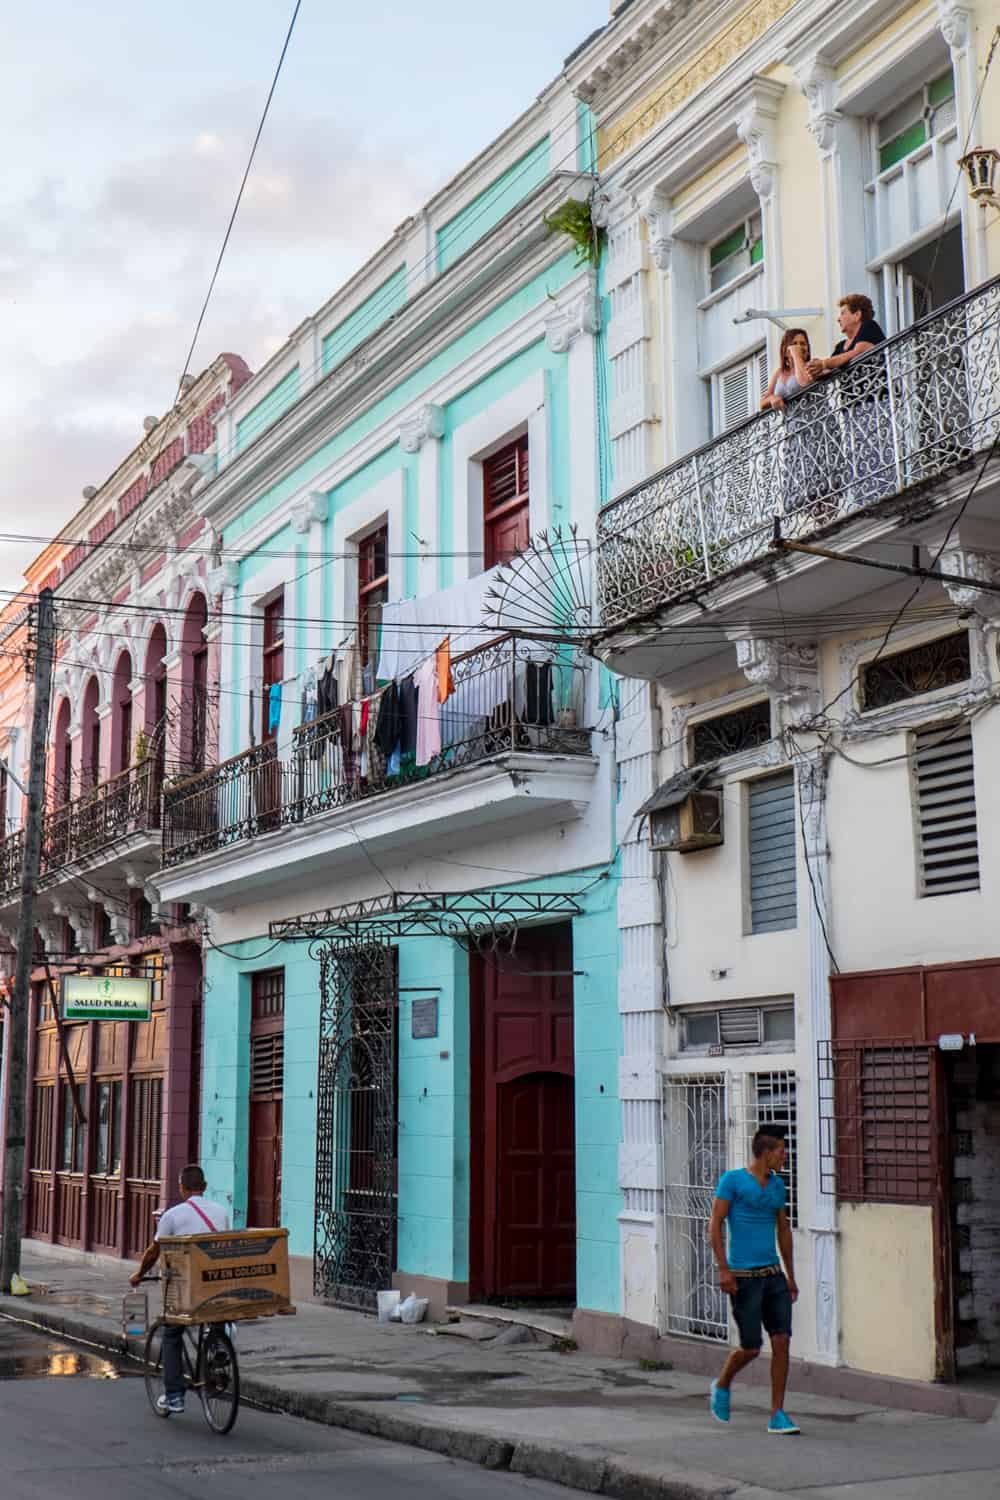 A street scene in Havana Cuba, with colourful houses and people. 